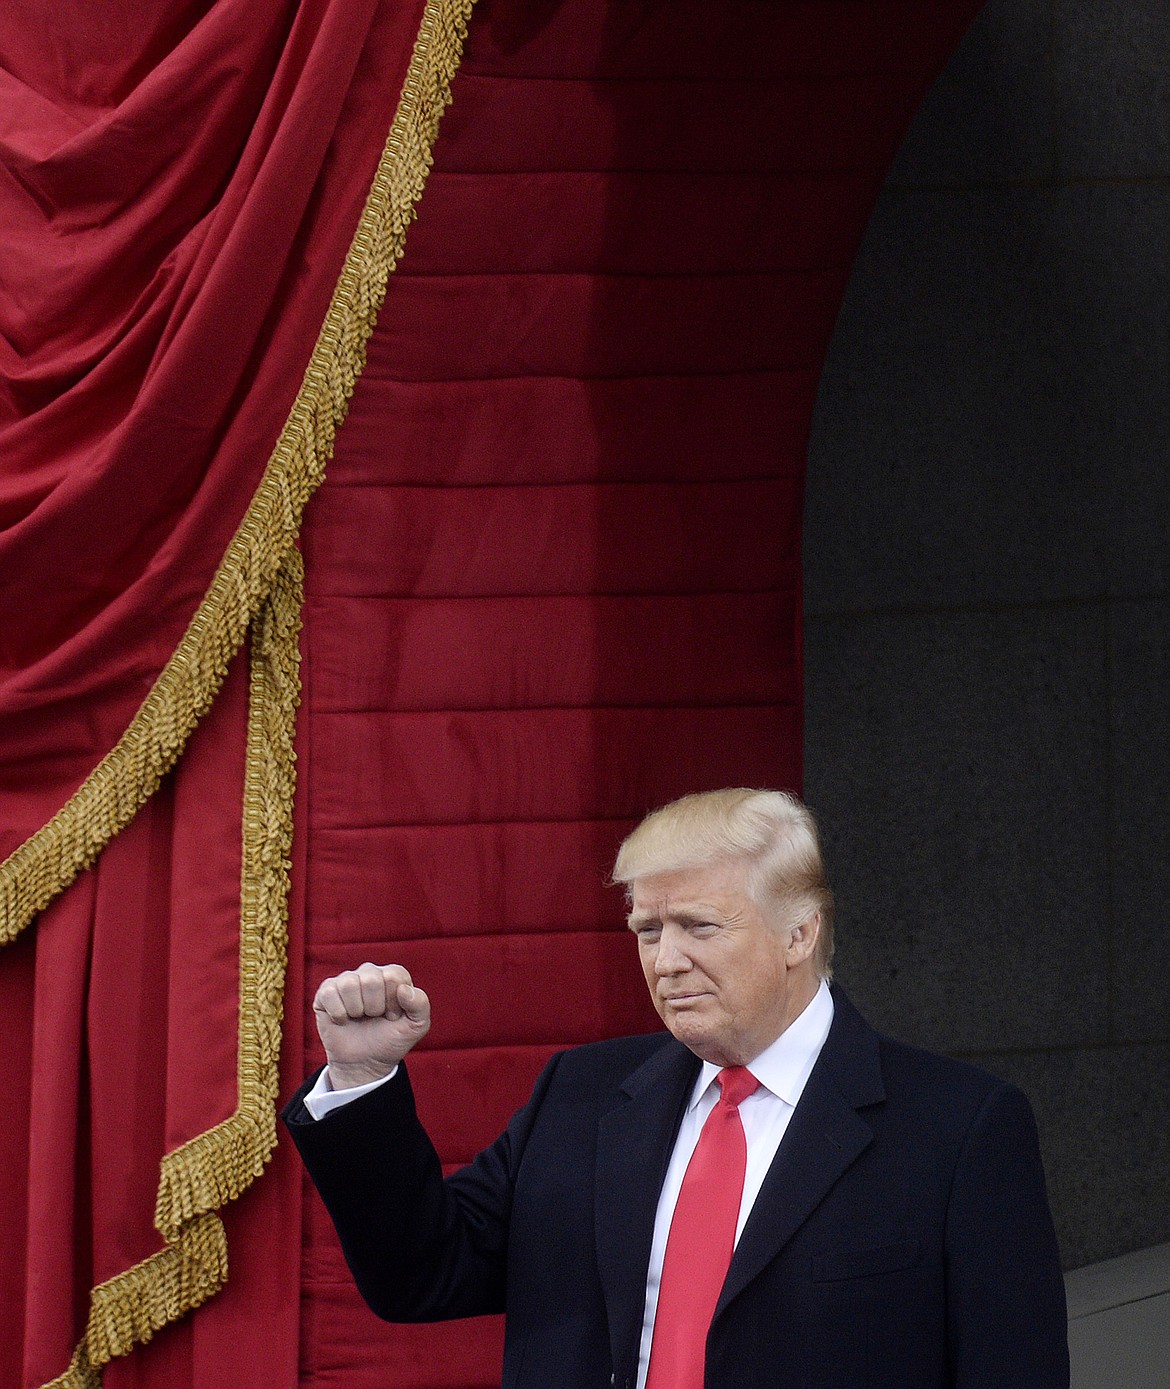 President Donald Trump waves during the 58th Presidential Inauguration on Jan. 20, 2017 in Washington, D.C. (Olivier Douliery/Abaca Press/TNS)